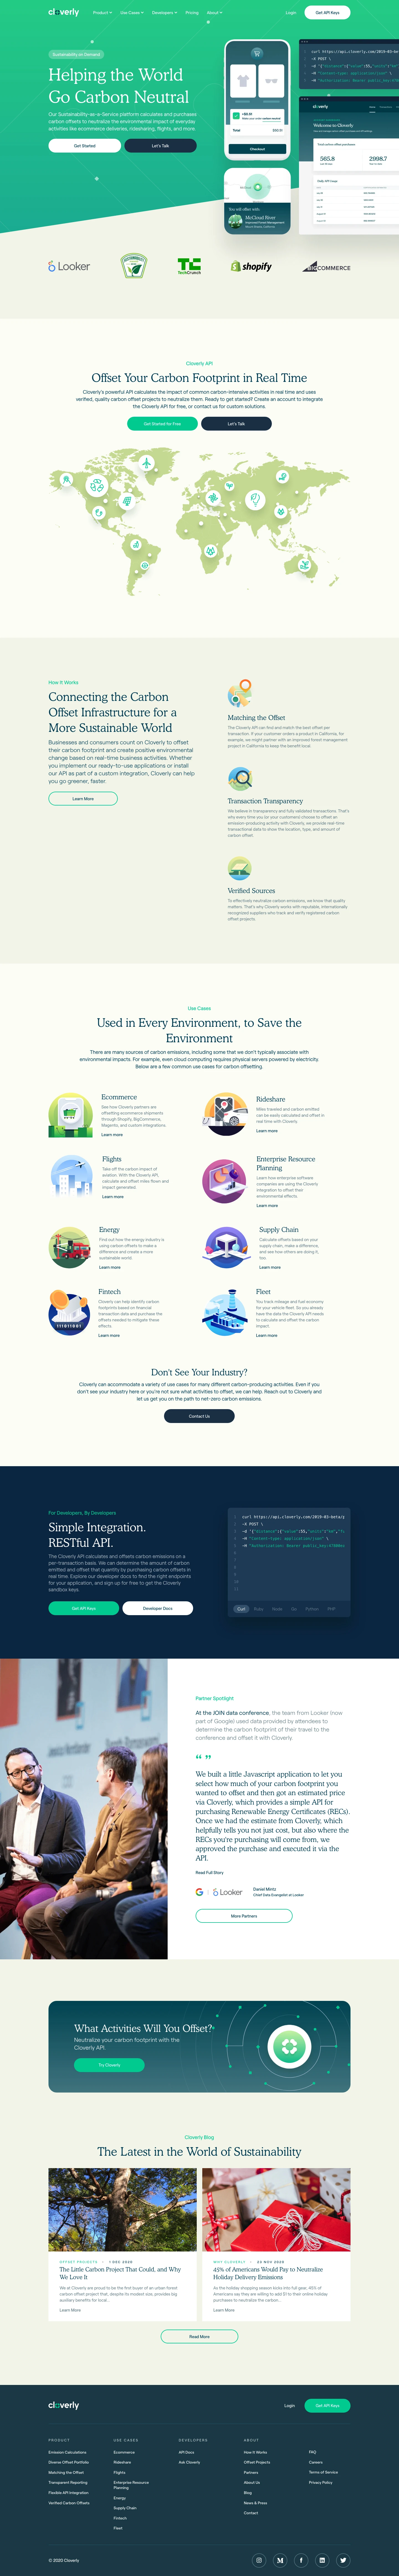 Cloverly Landing Page Example: Neutralize the environmental impact of your company's everyday activities with ease through free, accurate, on-demand carbon offsets with Cloverly.